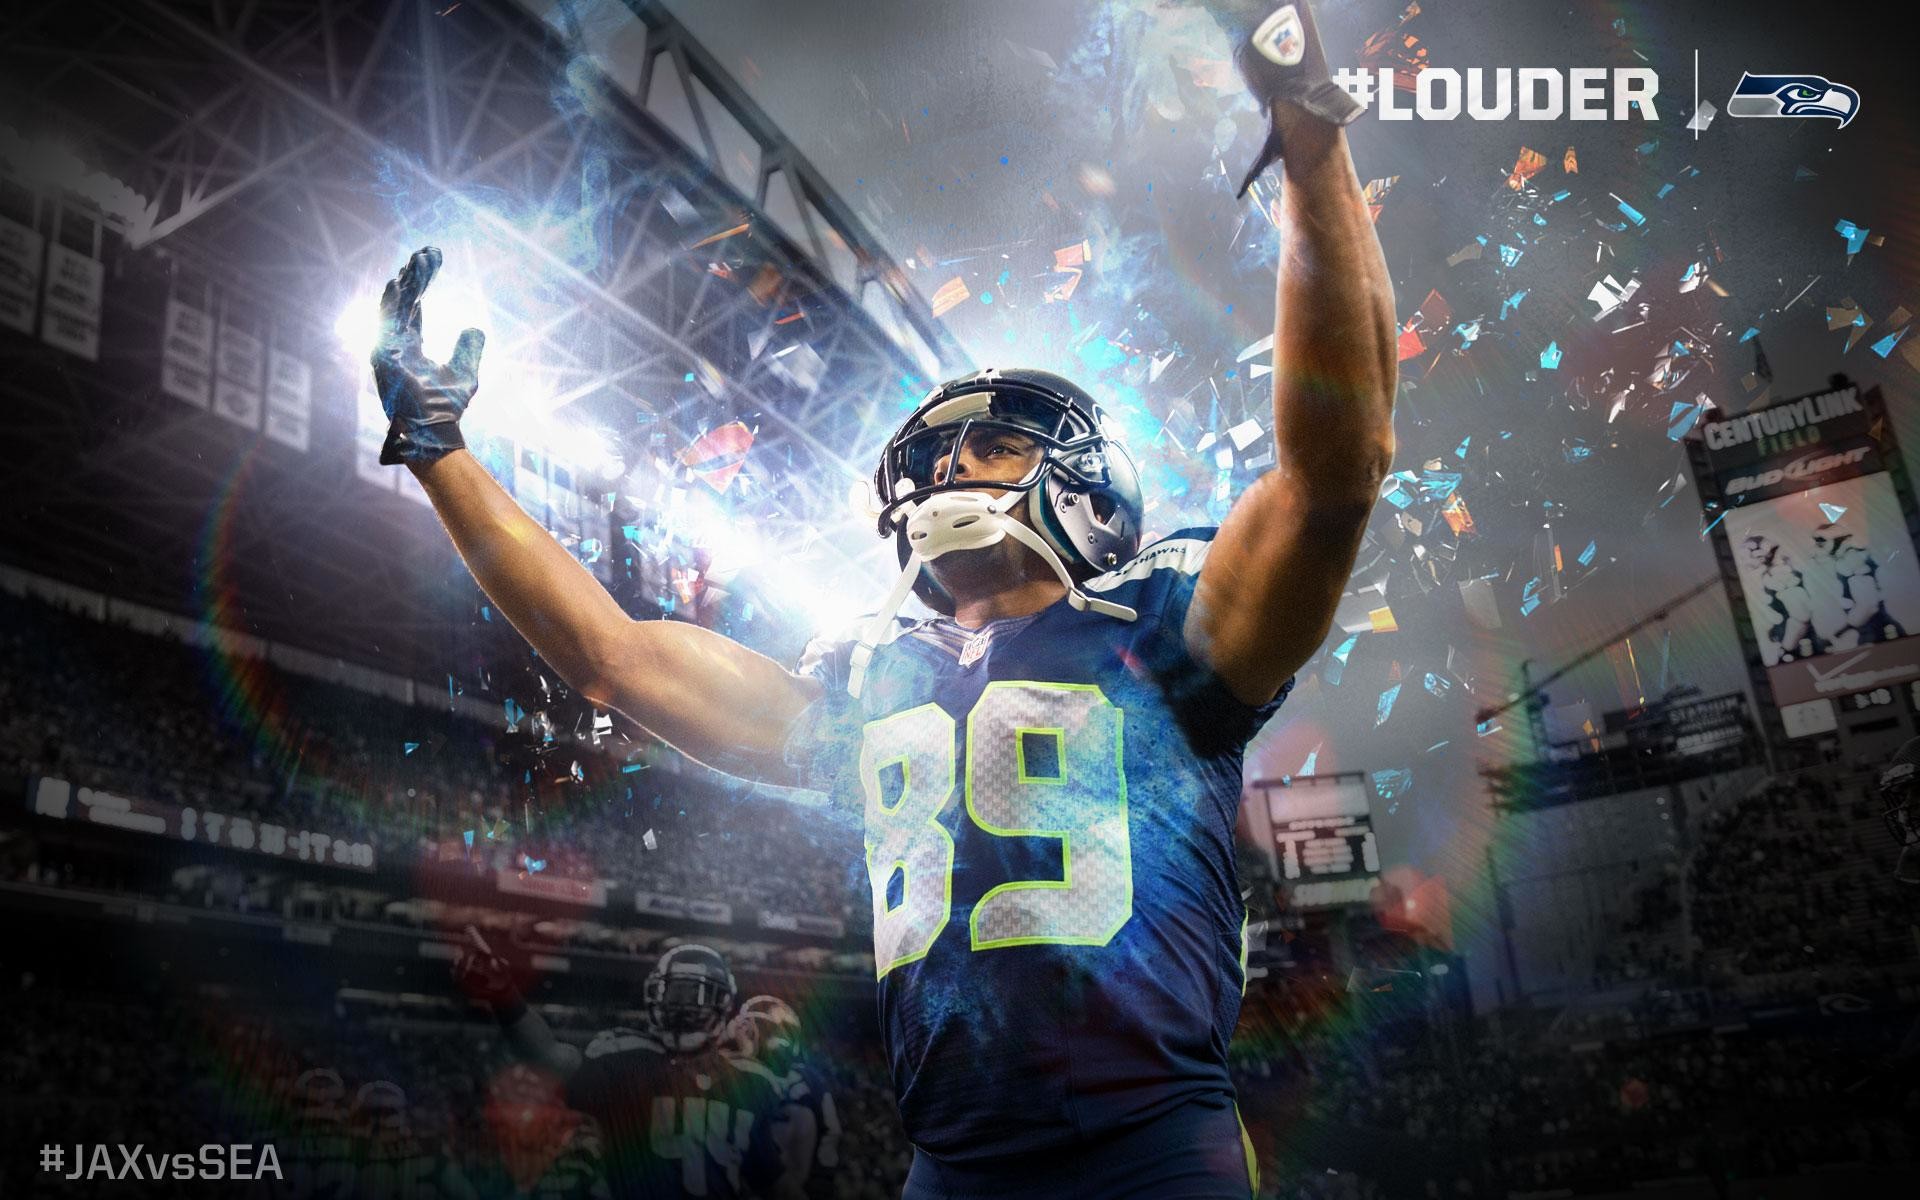 wallpaper.wiki-Seahawk-Pictures-PIC-WPE006940